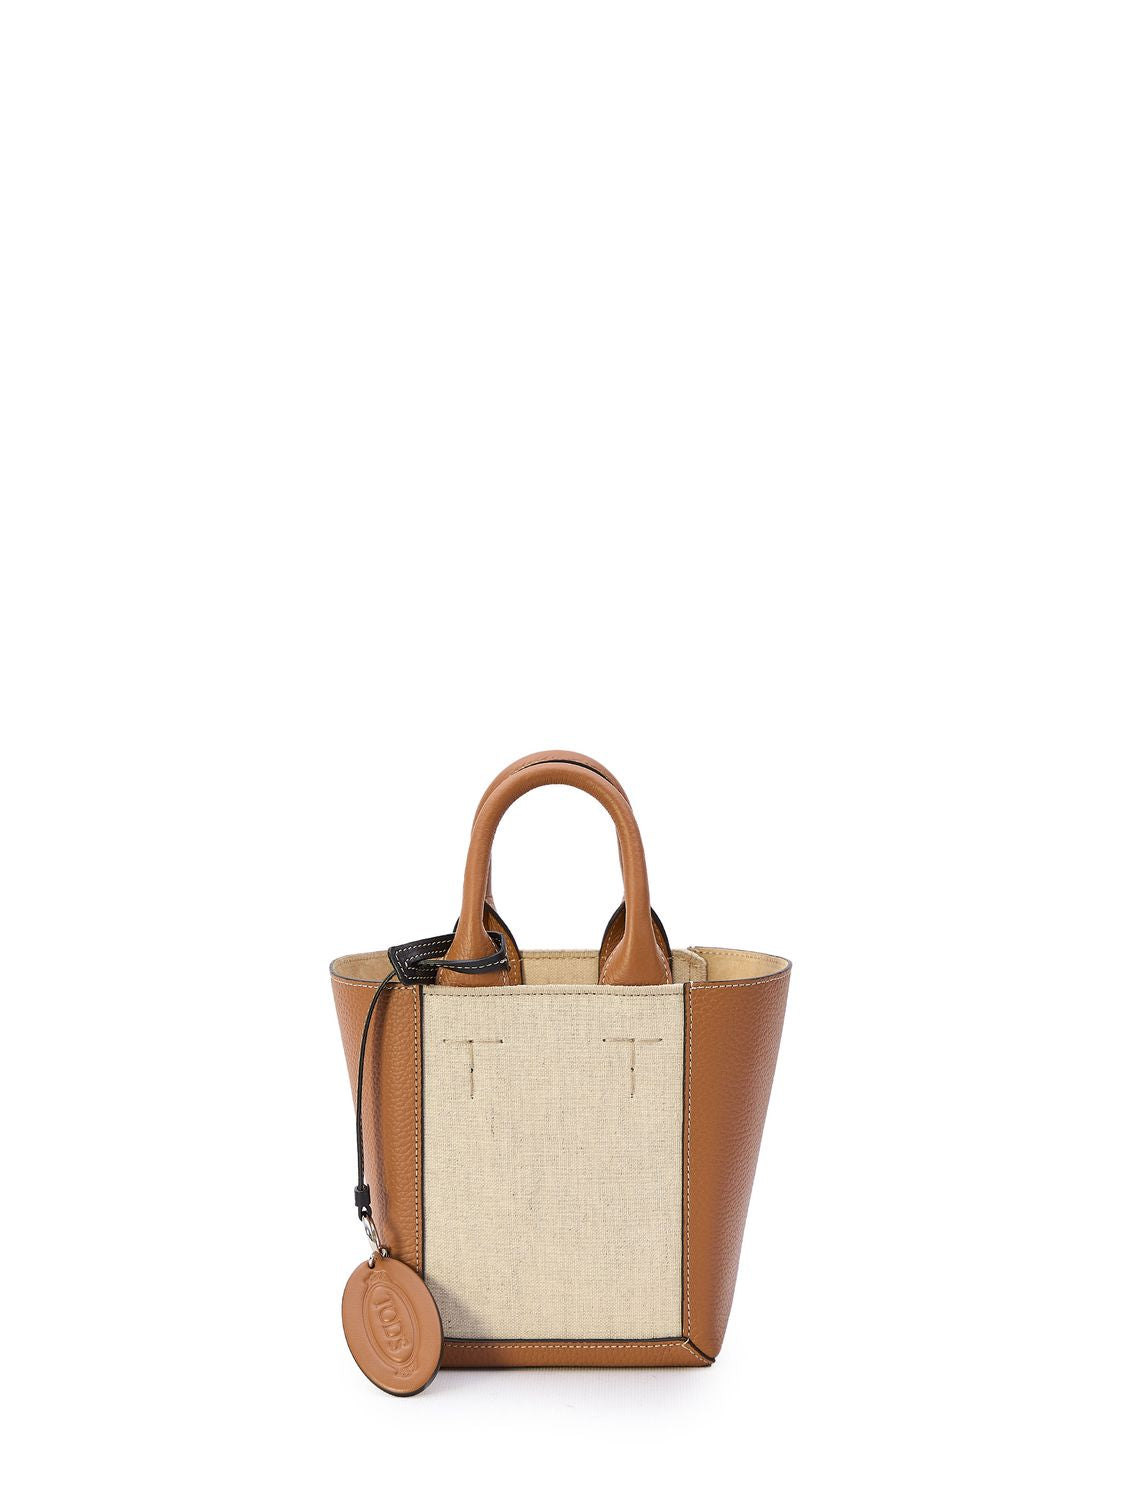 TOD'S Mini Duo-Tone Leather and Canvas Tote with Detachable Strap and Charm, Brown and Cream - 27x17x12 cm